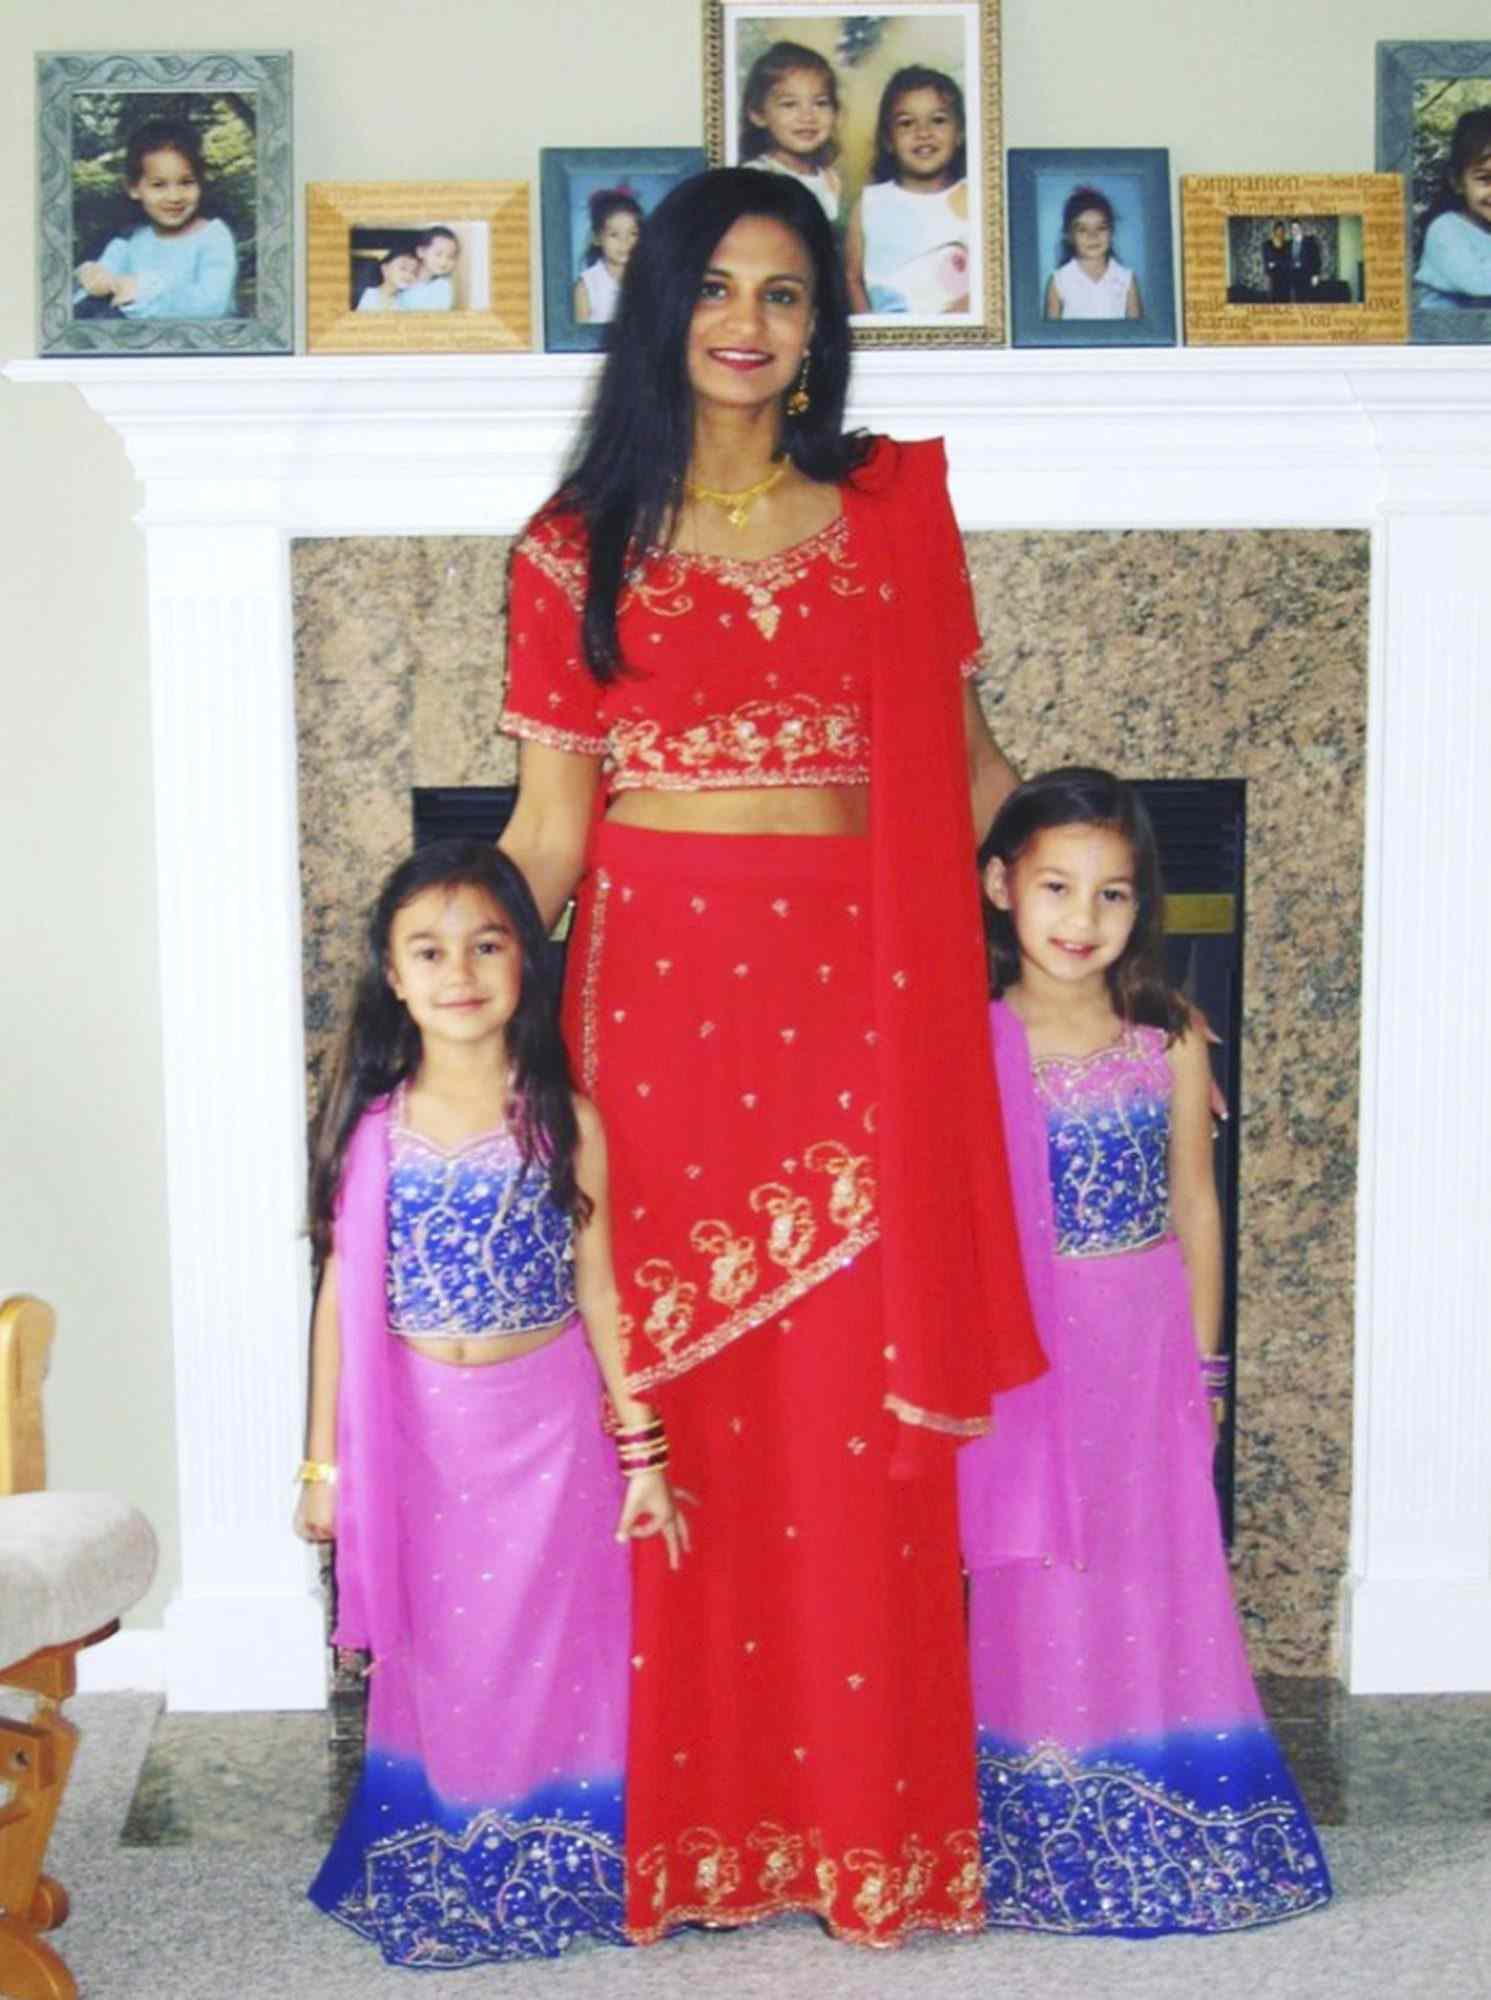 Anjum Coffland and her family